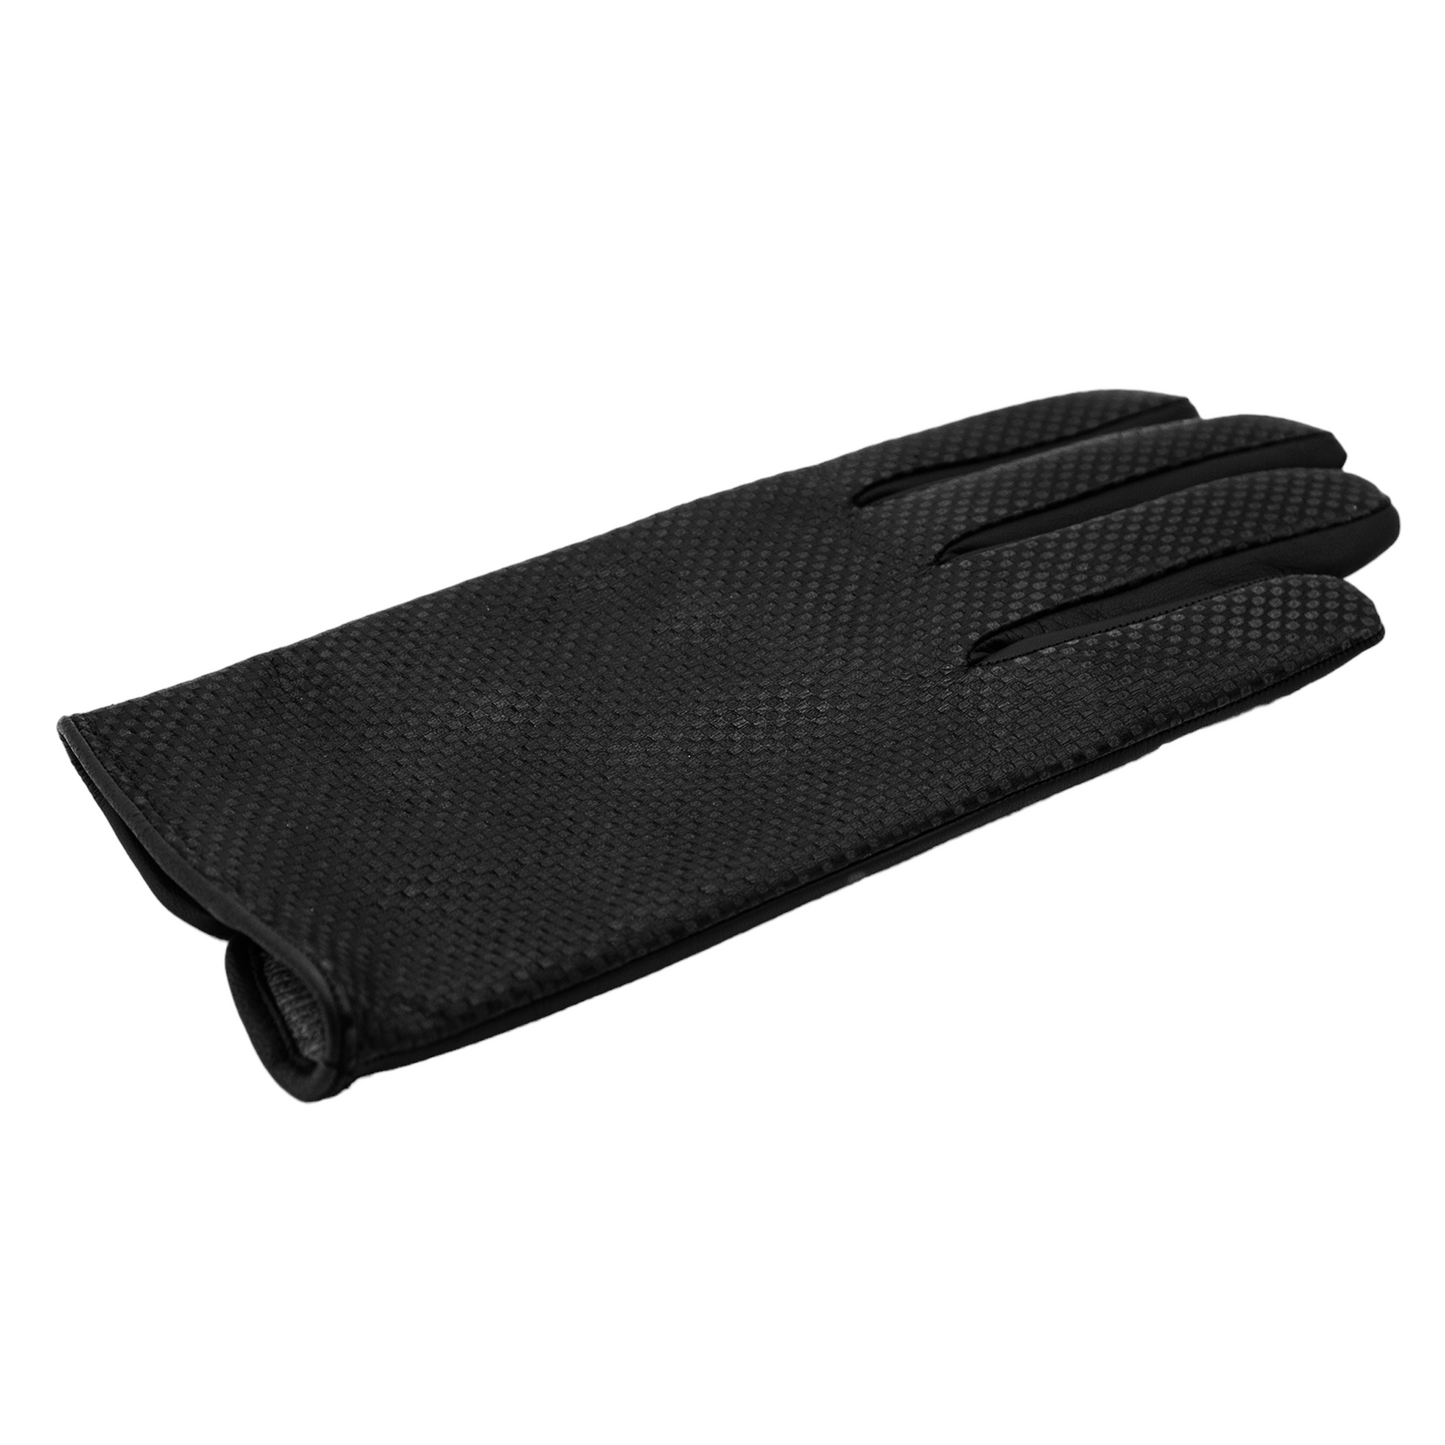 Men's black printed nappa touchscreen leather gloves and cashmere lining